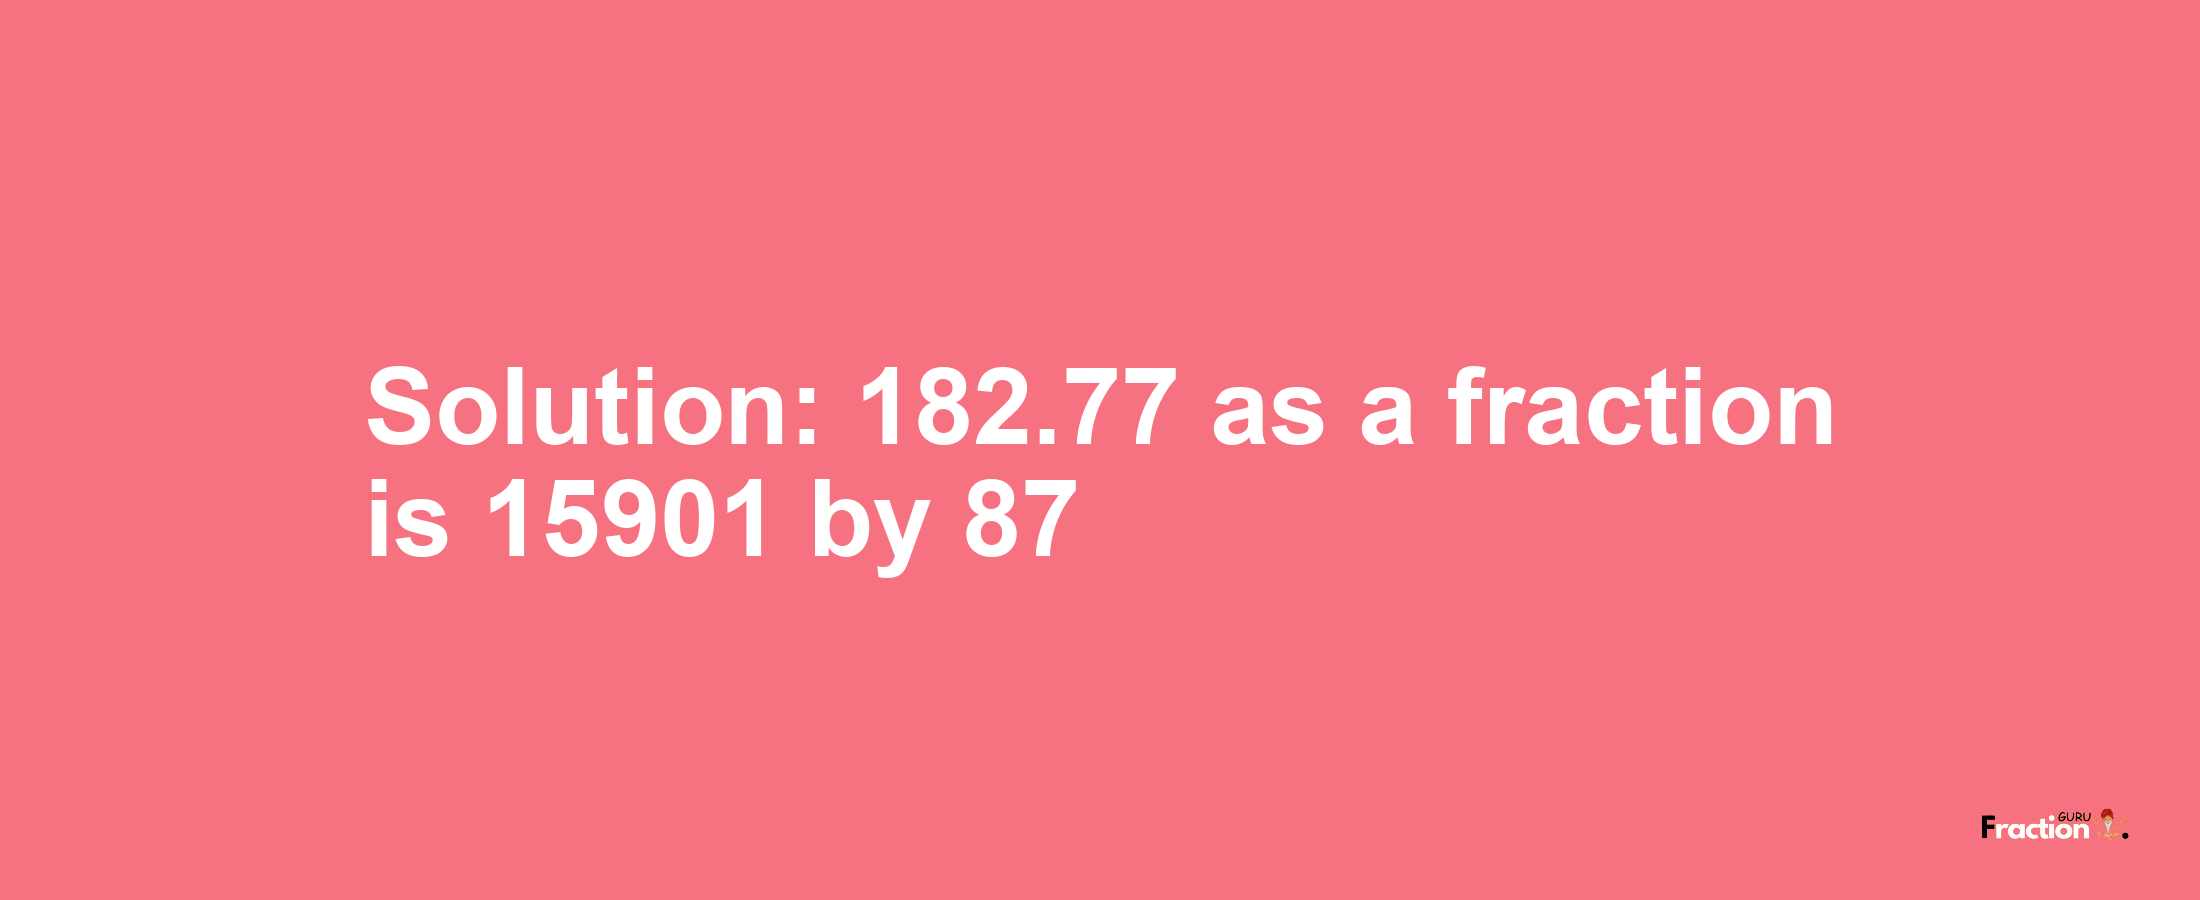 Solution:182.77 as a fraction is 15901/87